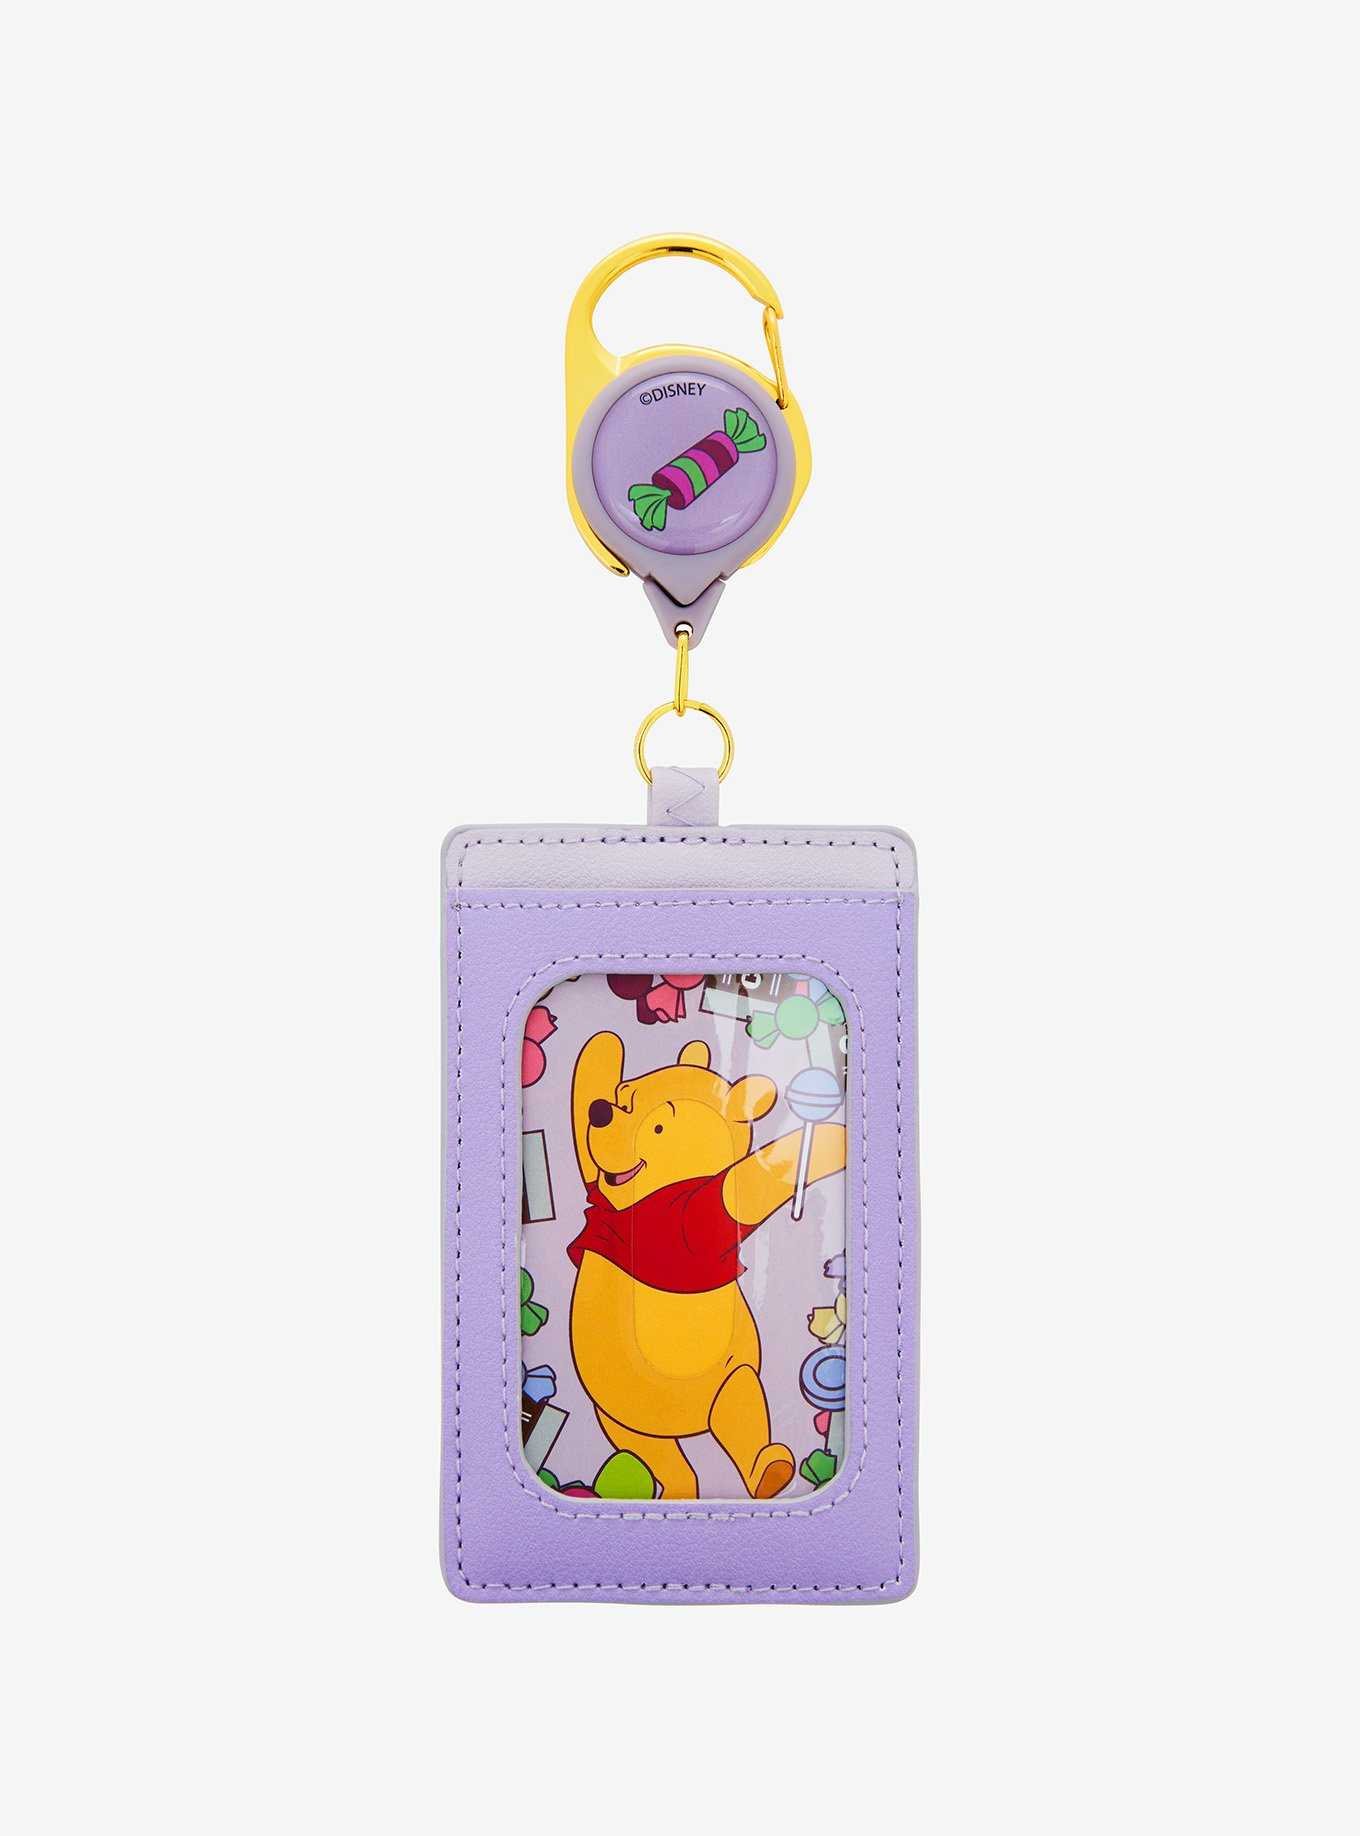 Disney Winnie the Pooh Candy Pooh Bear Retractable Lanyard - BoxLunch Exclusive, , hi-res